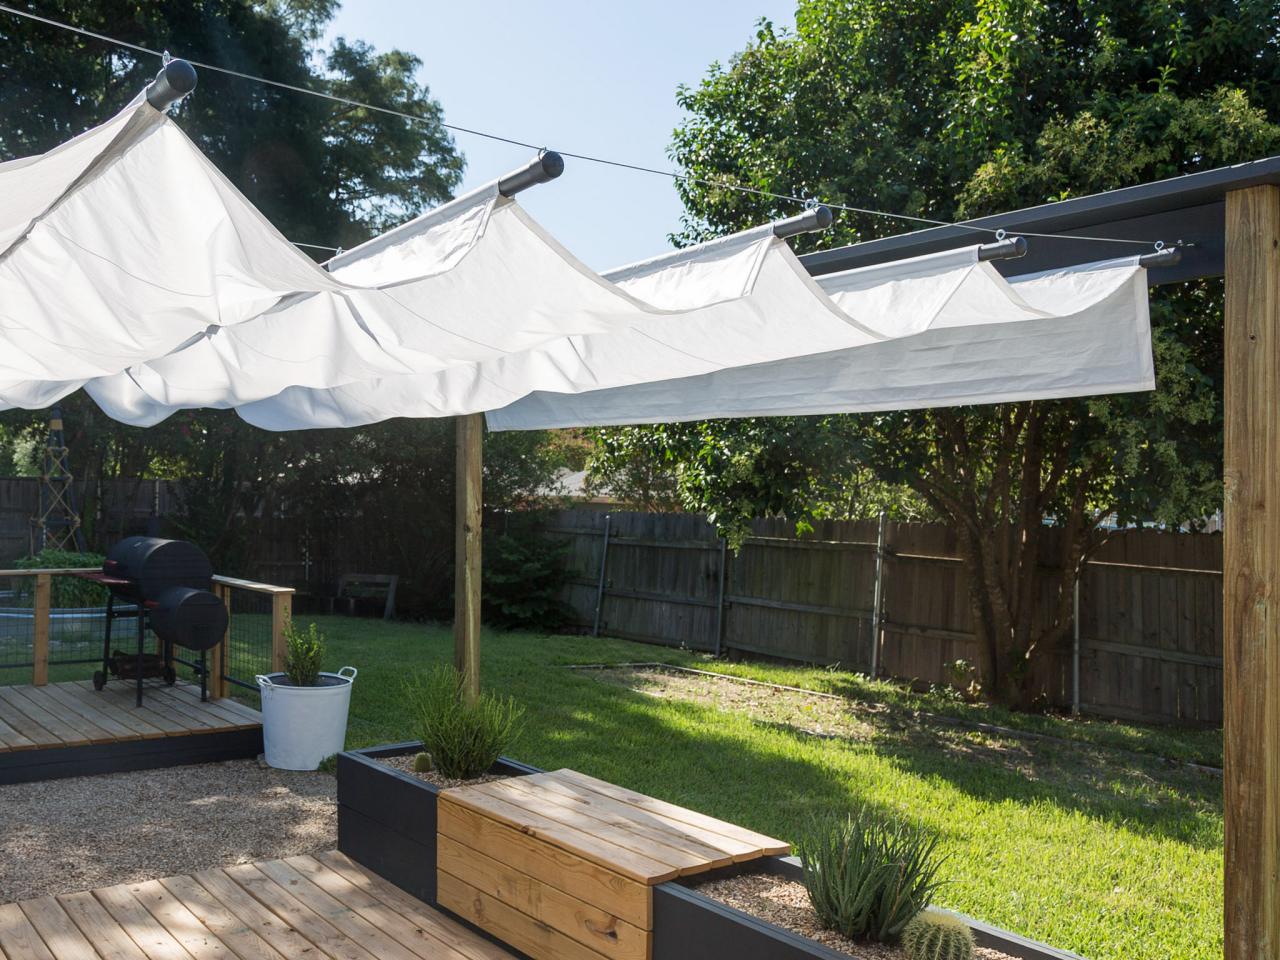 How To Build An Outdoor Canopy, How To Build Your Own Patio Canopy